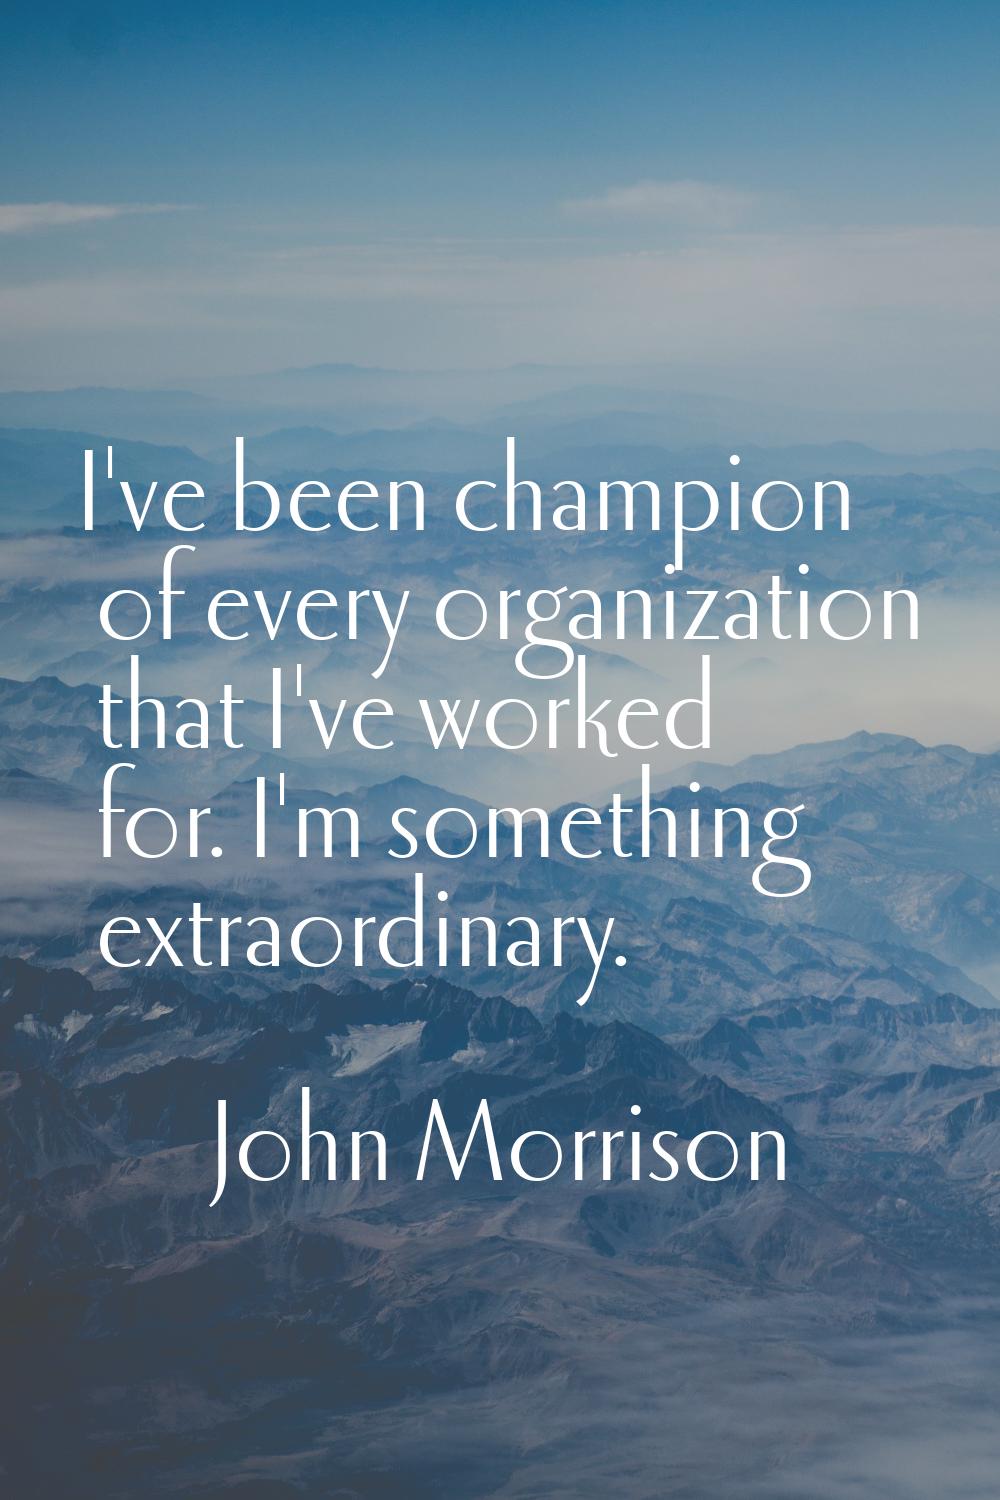 I've been champion of every organization that I've worked for. I'm something extraordinary.